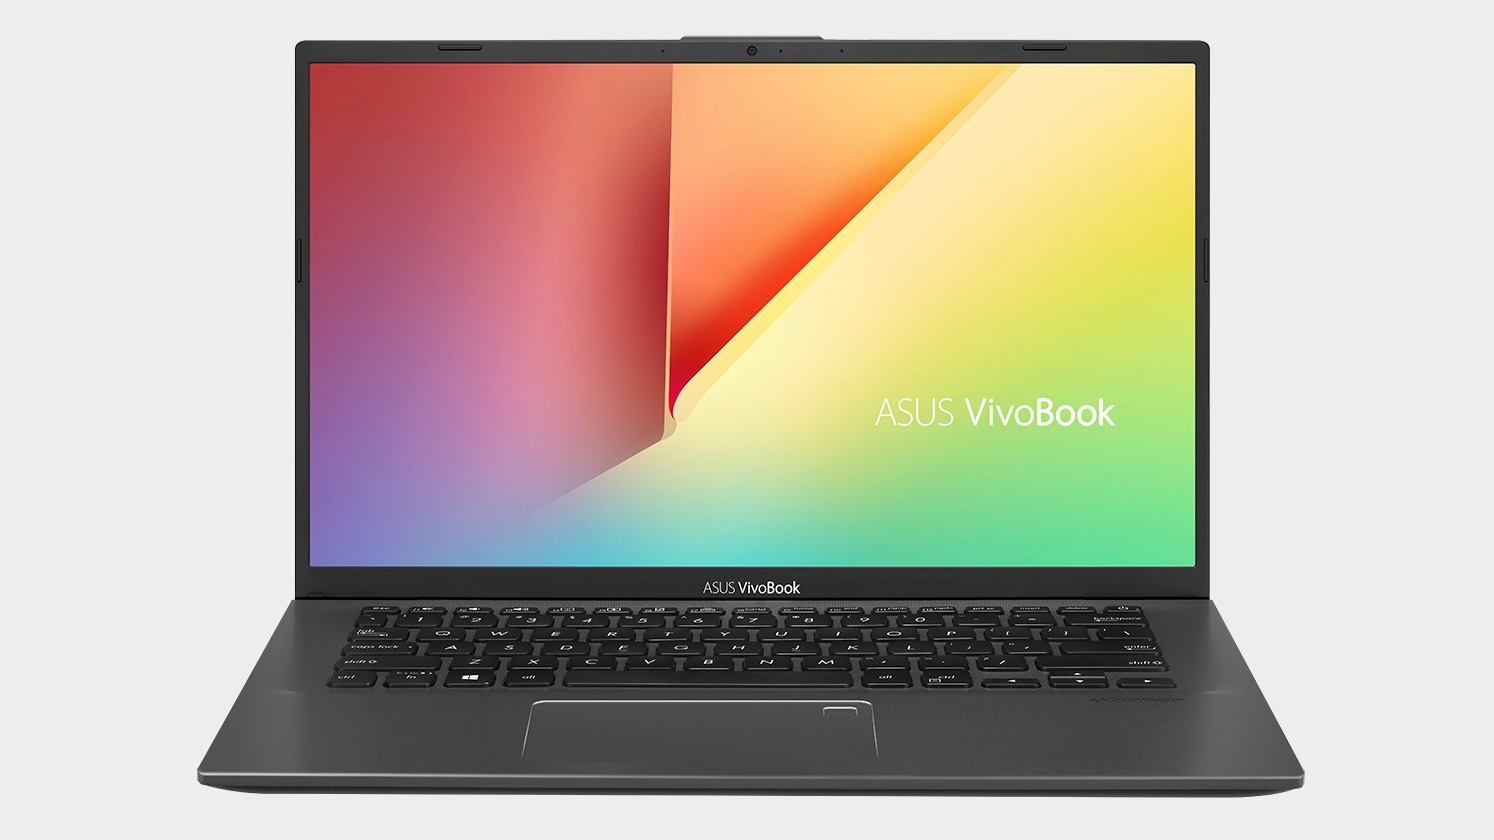  This $380 Asus VivoBook is a great laptop for productivity and light gaming 